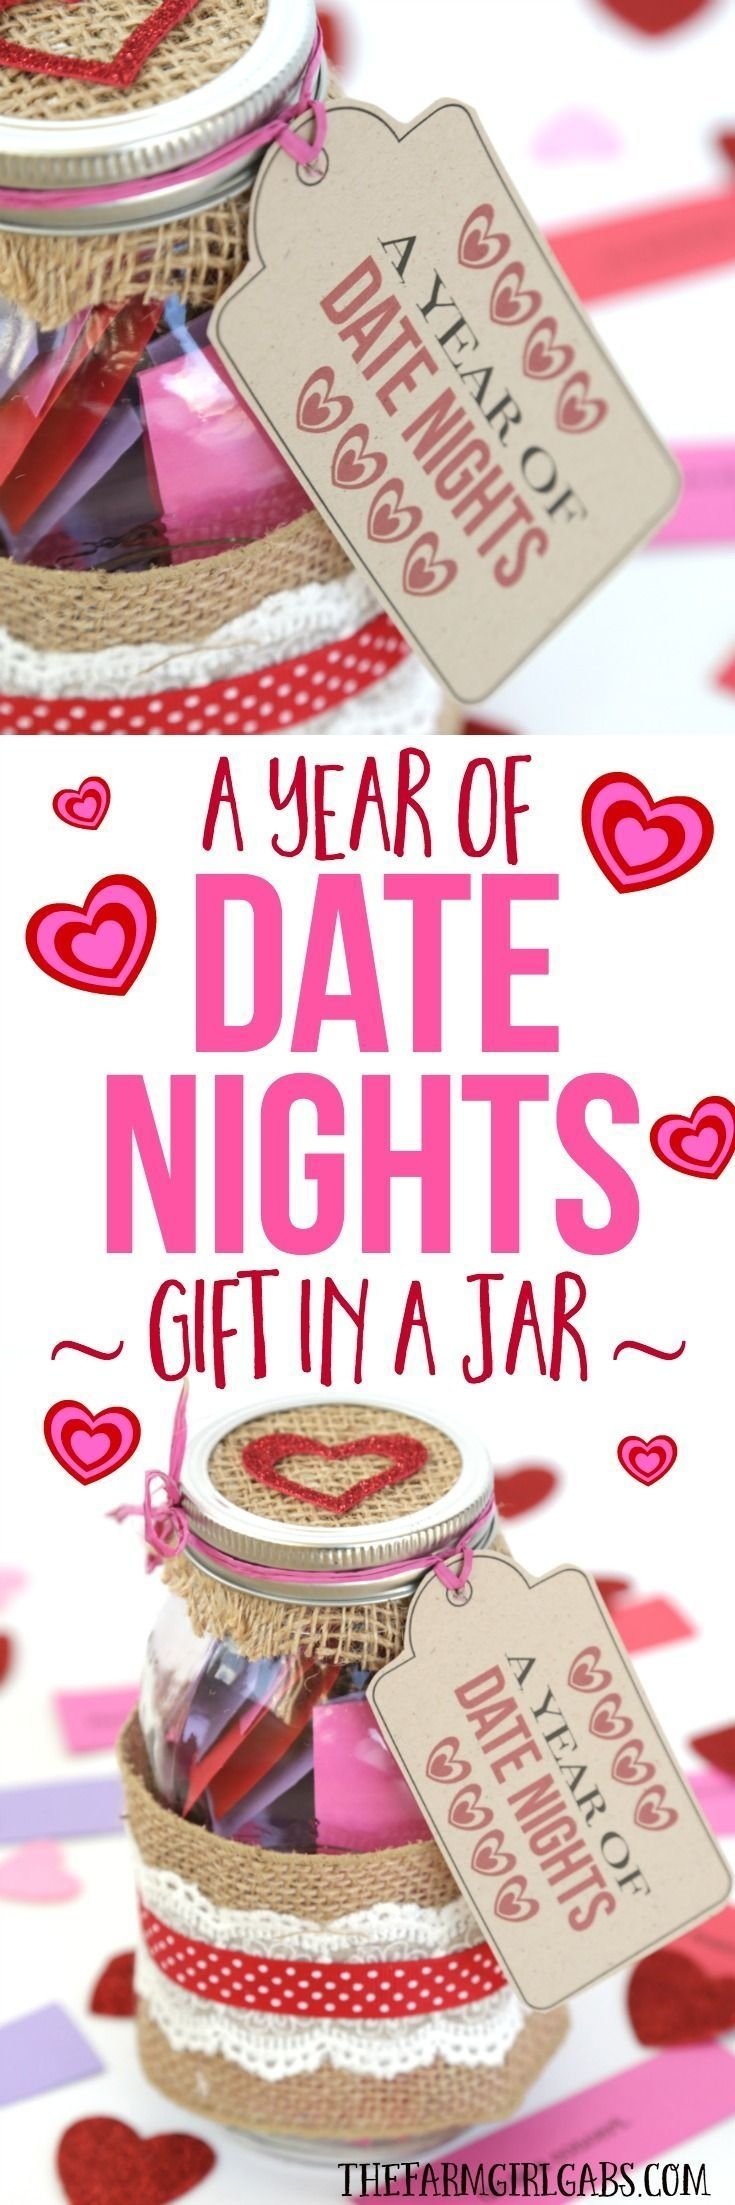 10 Gorgeous Fun Date Ideas Valentines Day 152 best date ideas images on pinterest my love romantic ideas 7 2022